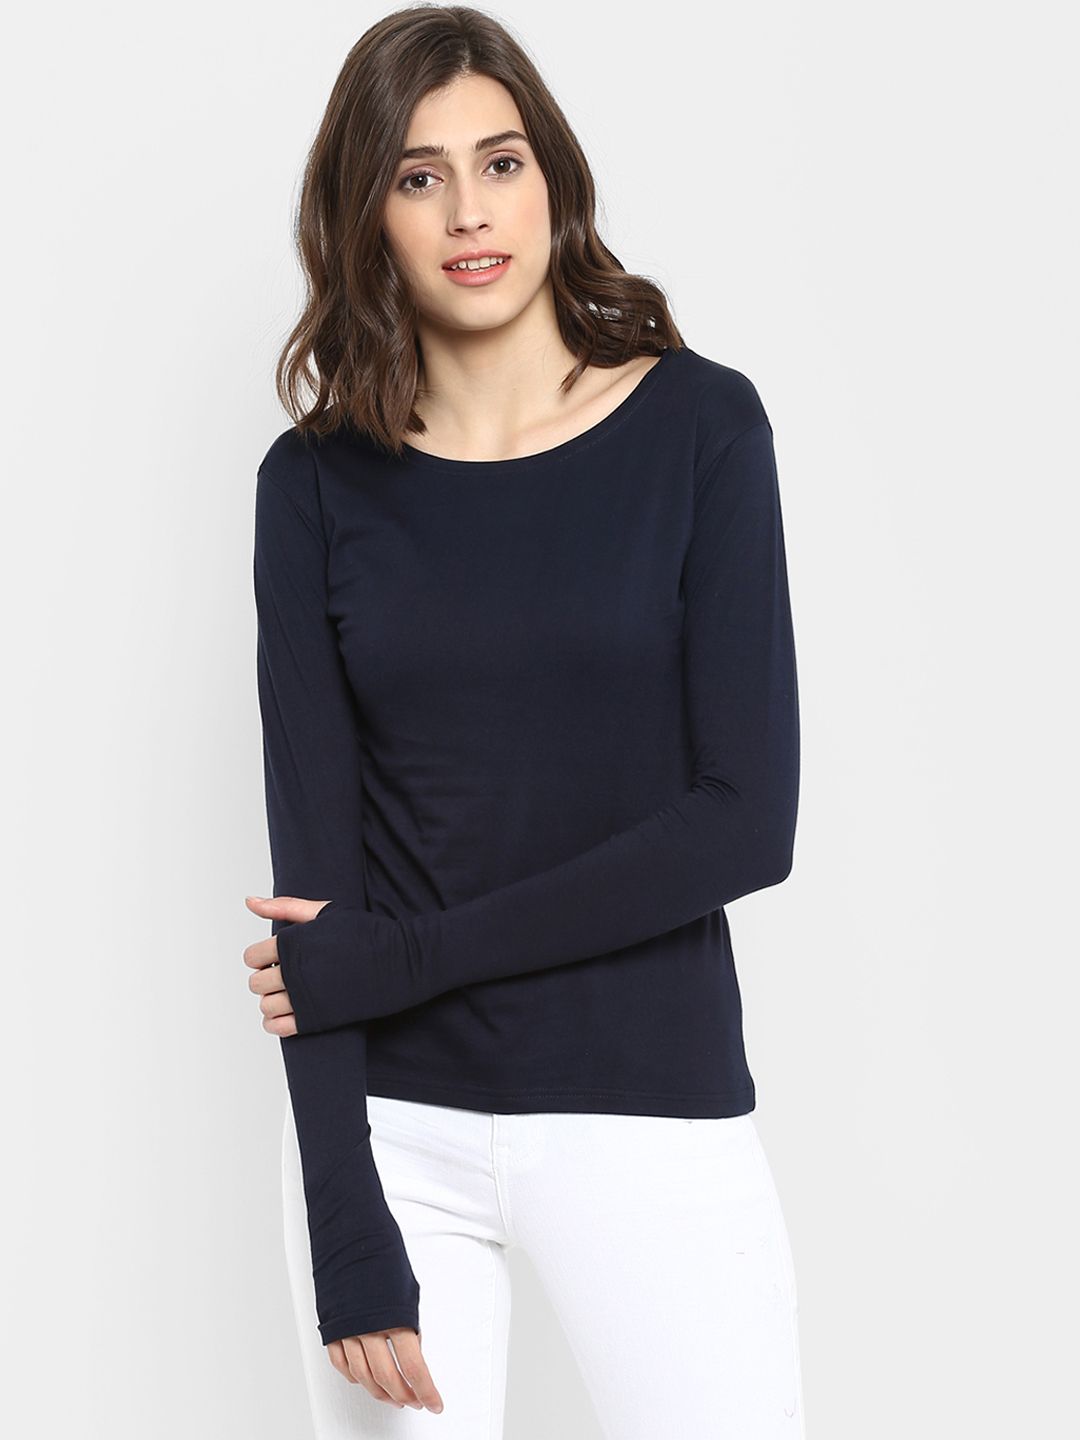 appulse Women Navy Blue Solid Round Neck T-shirt Price in India